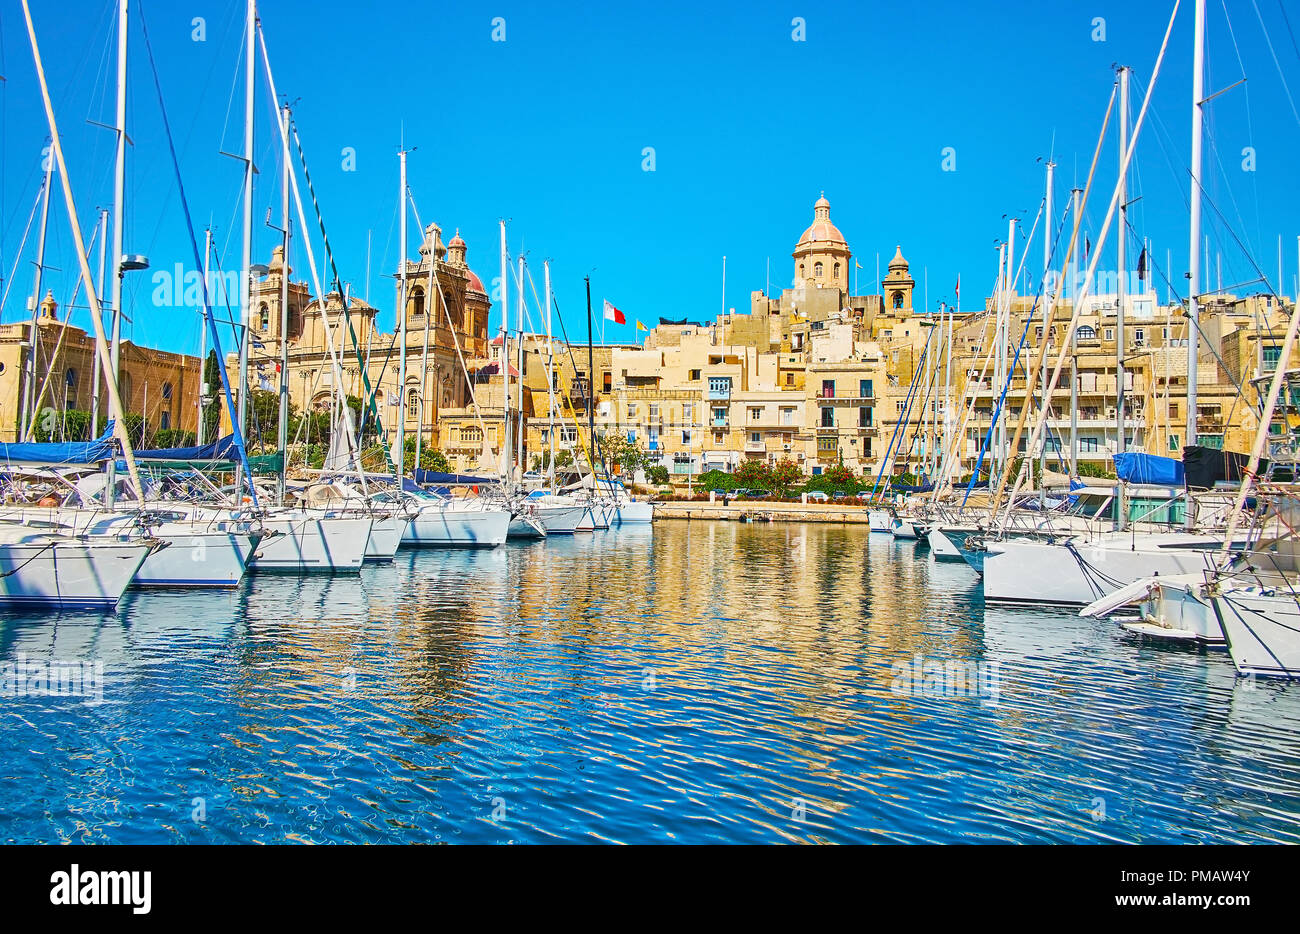 The Vittoriosa Marina opens the view on huge domes of medieval St Lawrence and Annunciation churches in Birgu, Malta. Stock Photo